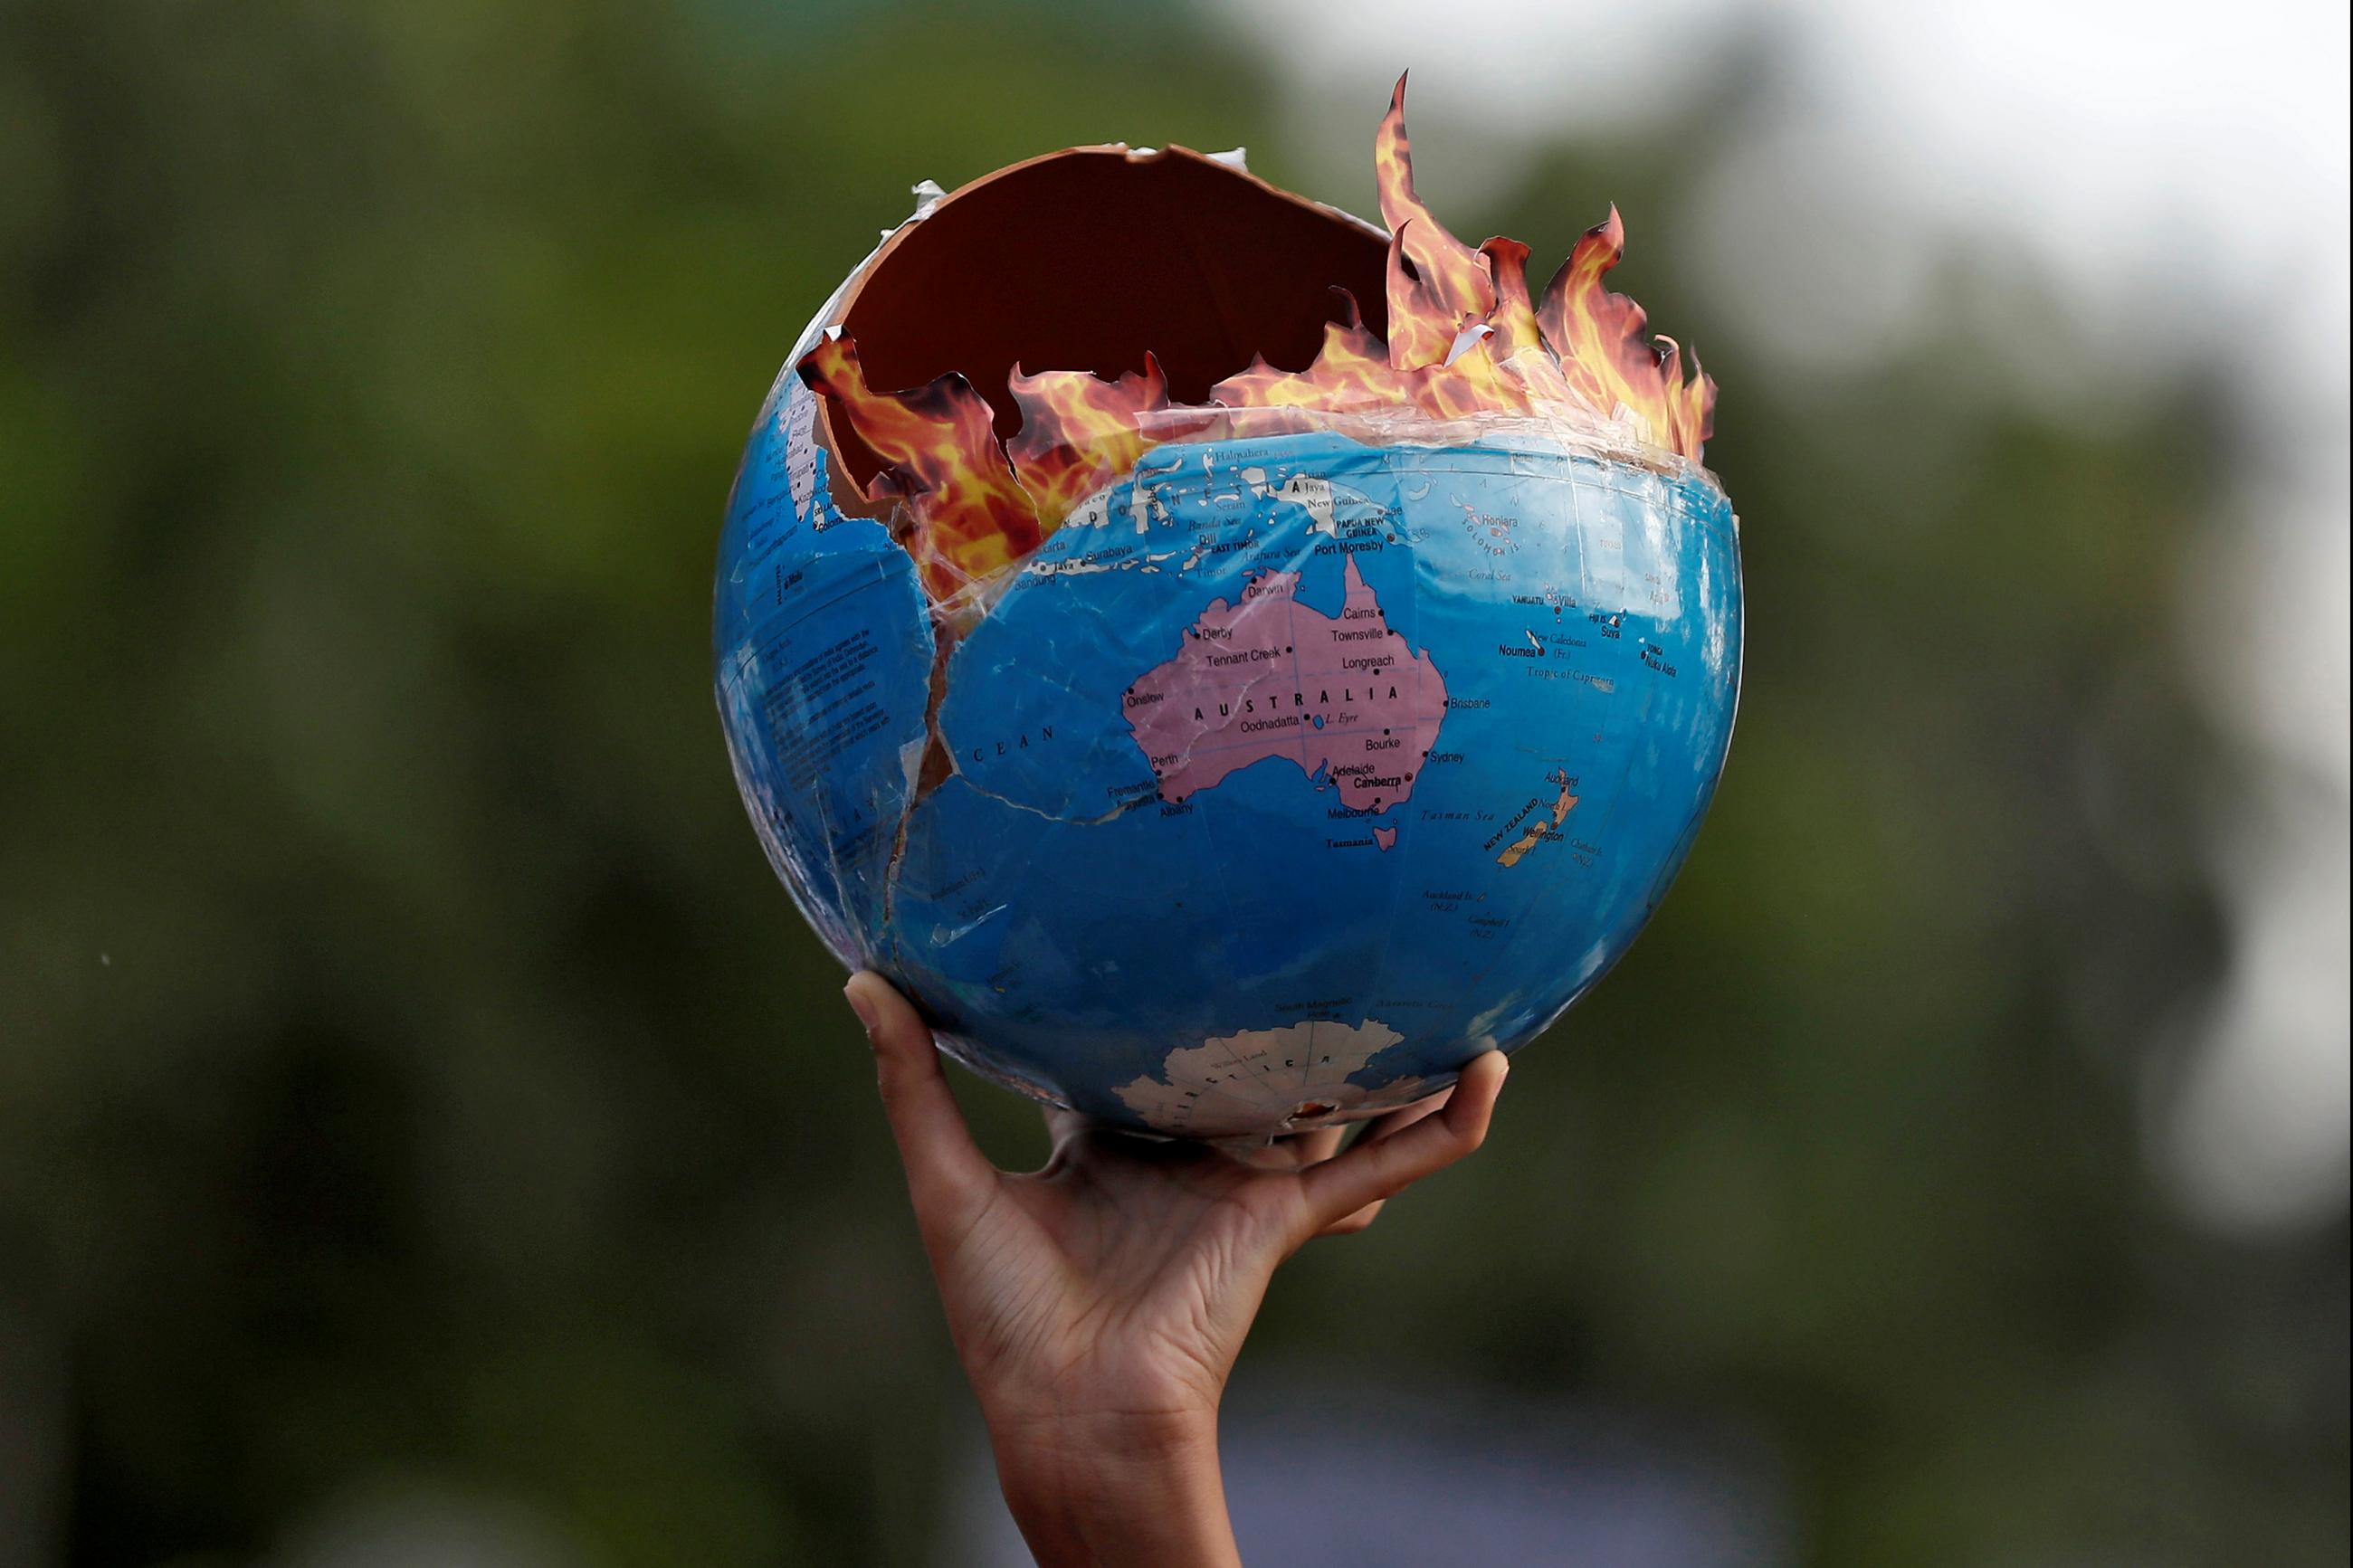 A protestor participating in a "Fridays for Future" march calling for urgent measures to combat climate change holds a globe designed to look like it is on fire, in Mumbai, India, on September 27, 2019. 